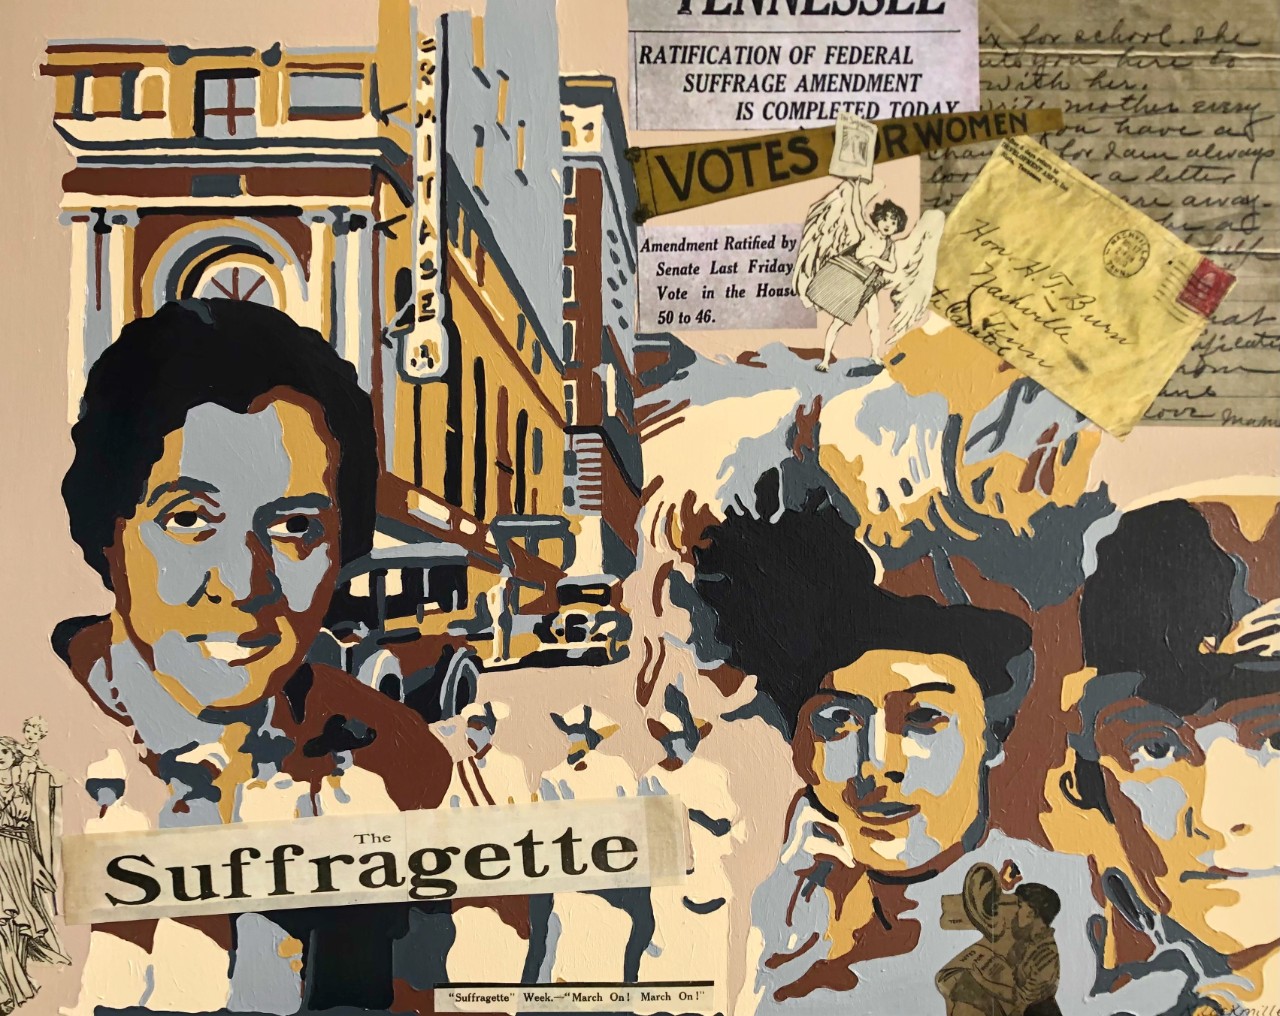 a mixed media collage in a muted color palette of tans, browns and dark blues. The collage shows several painted faces and bodies of women, a city block with buildings a taxi on the street, and old papers and letters. Papers featured include a newspaper headline titled “The Suffragette”, an aged envelope with a stamp and cursive script, a handwritten letter, and a newspaper clipping that reads “Ratification of federal suffrage amendment is completed today.” The women are wearing hairstyles and clothes of the 1920s.